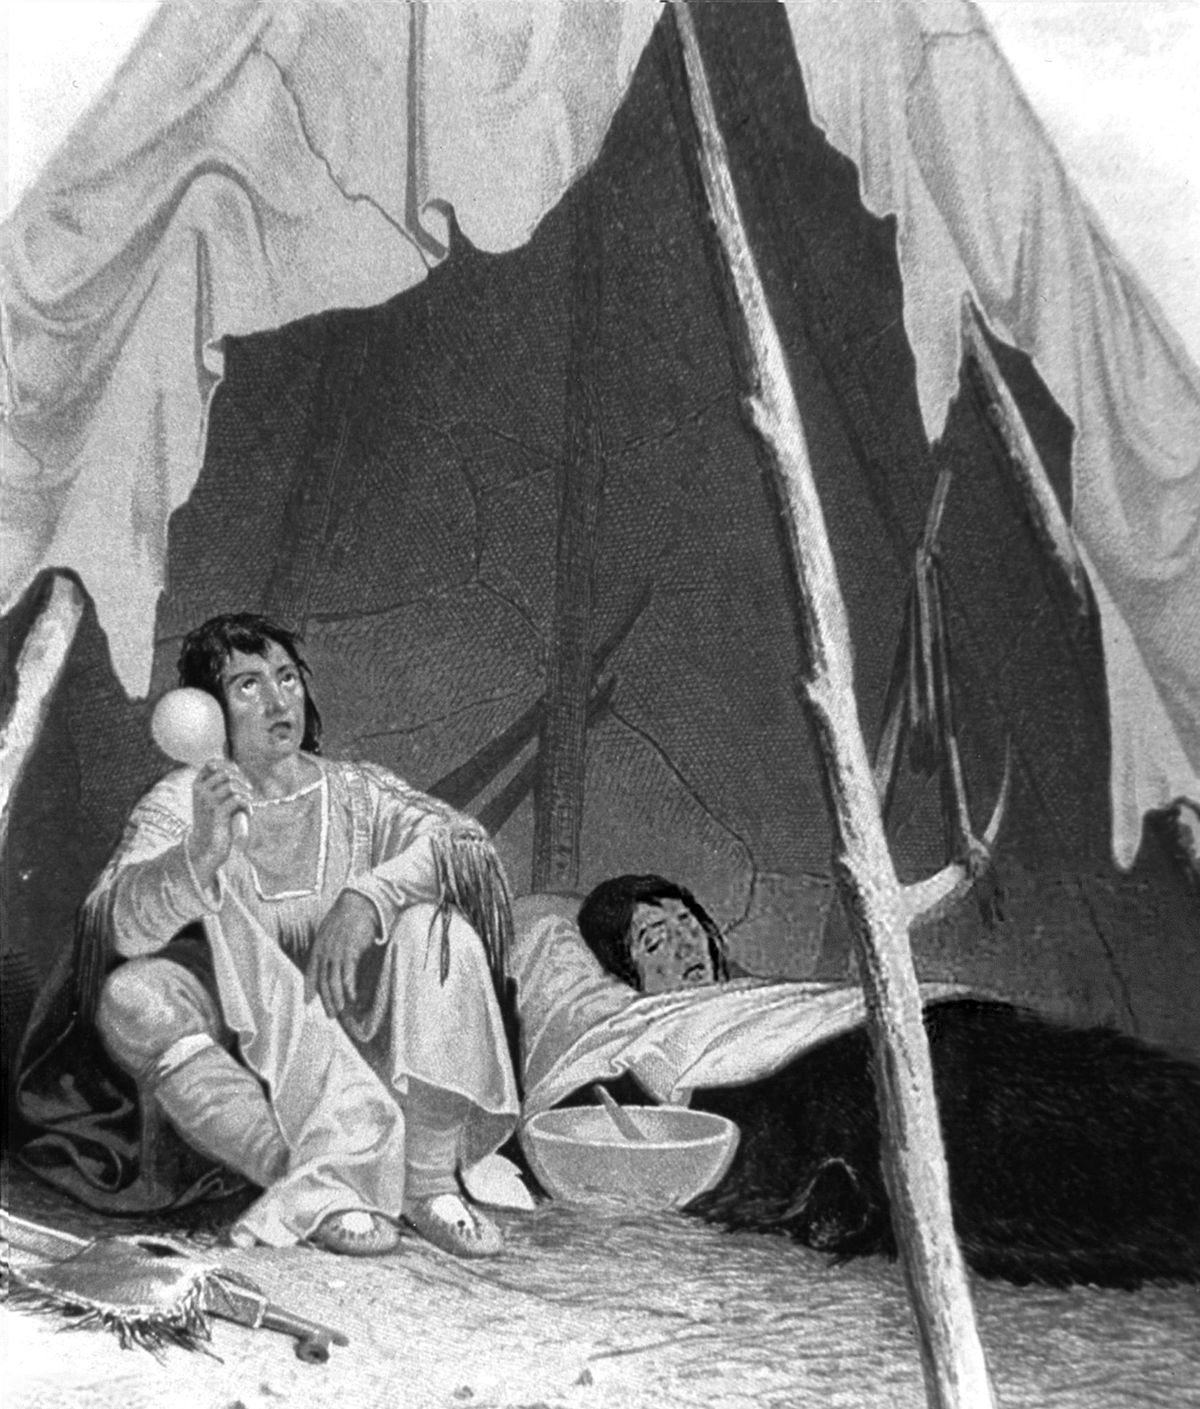 Nineteenth-century American artist’s conception of a medicine man caring for a sick American Indian, from an 1857 book illustration.  (National Library of Medicine)